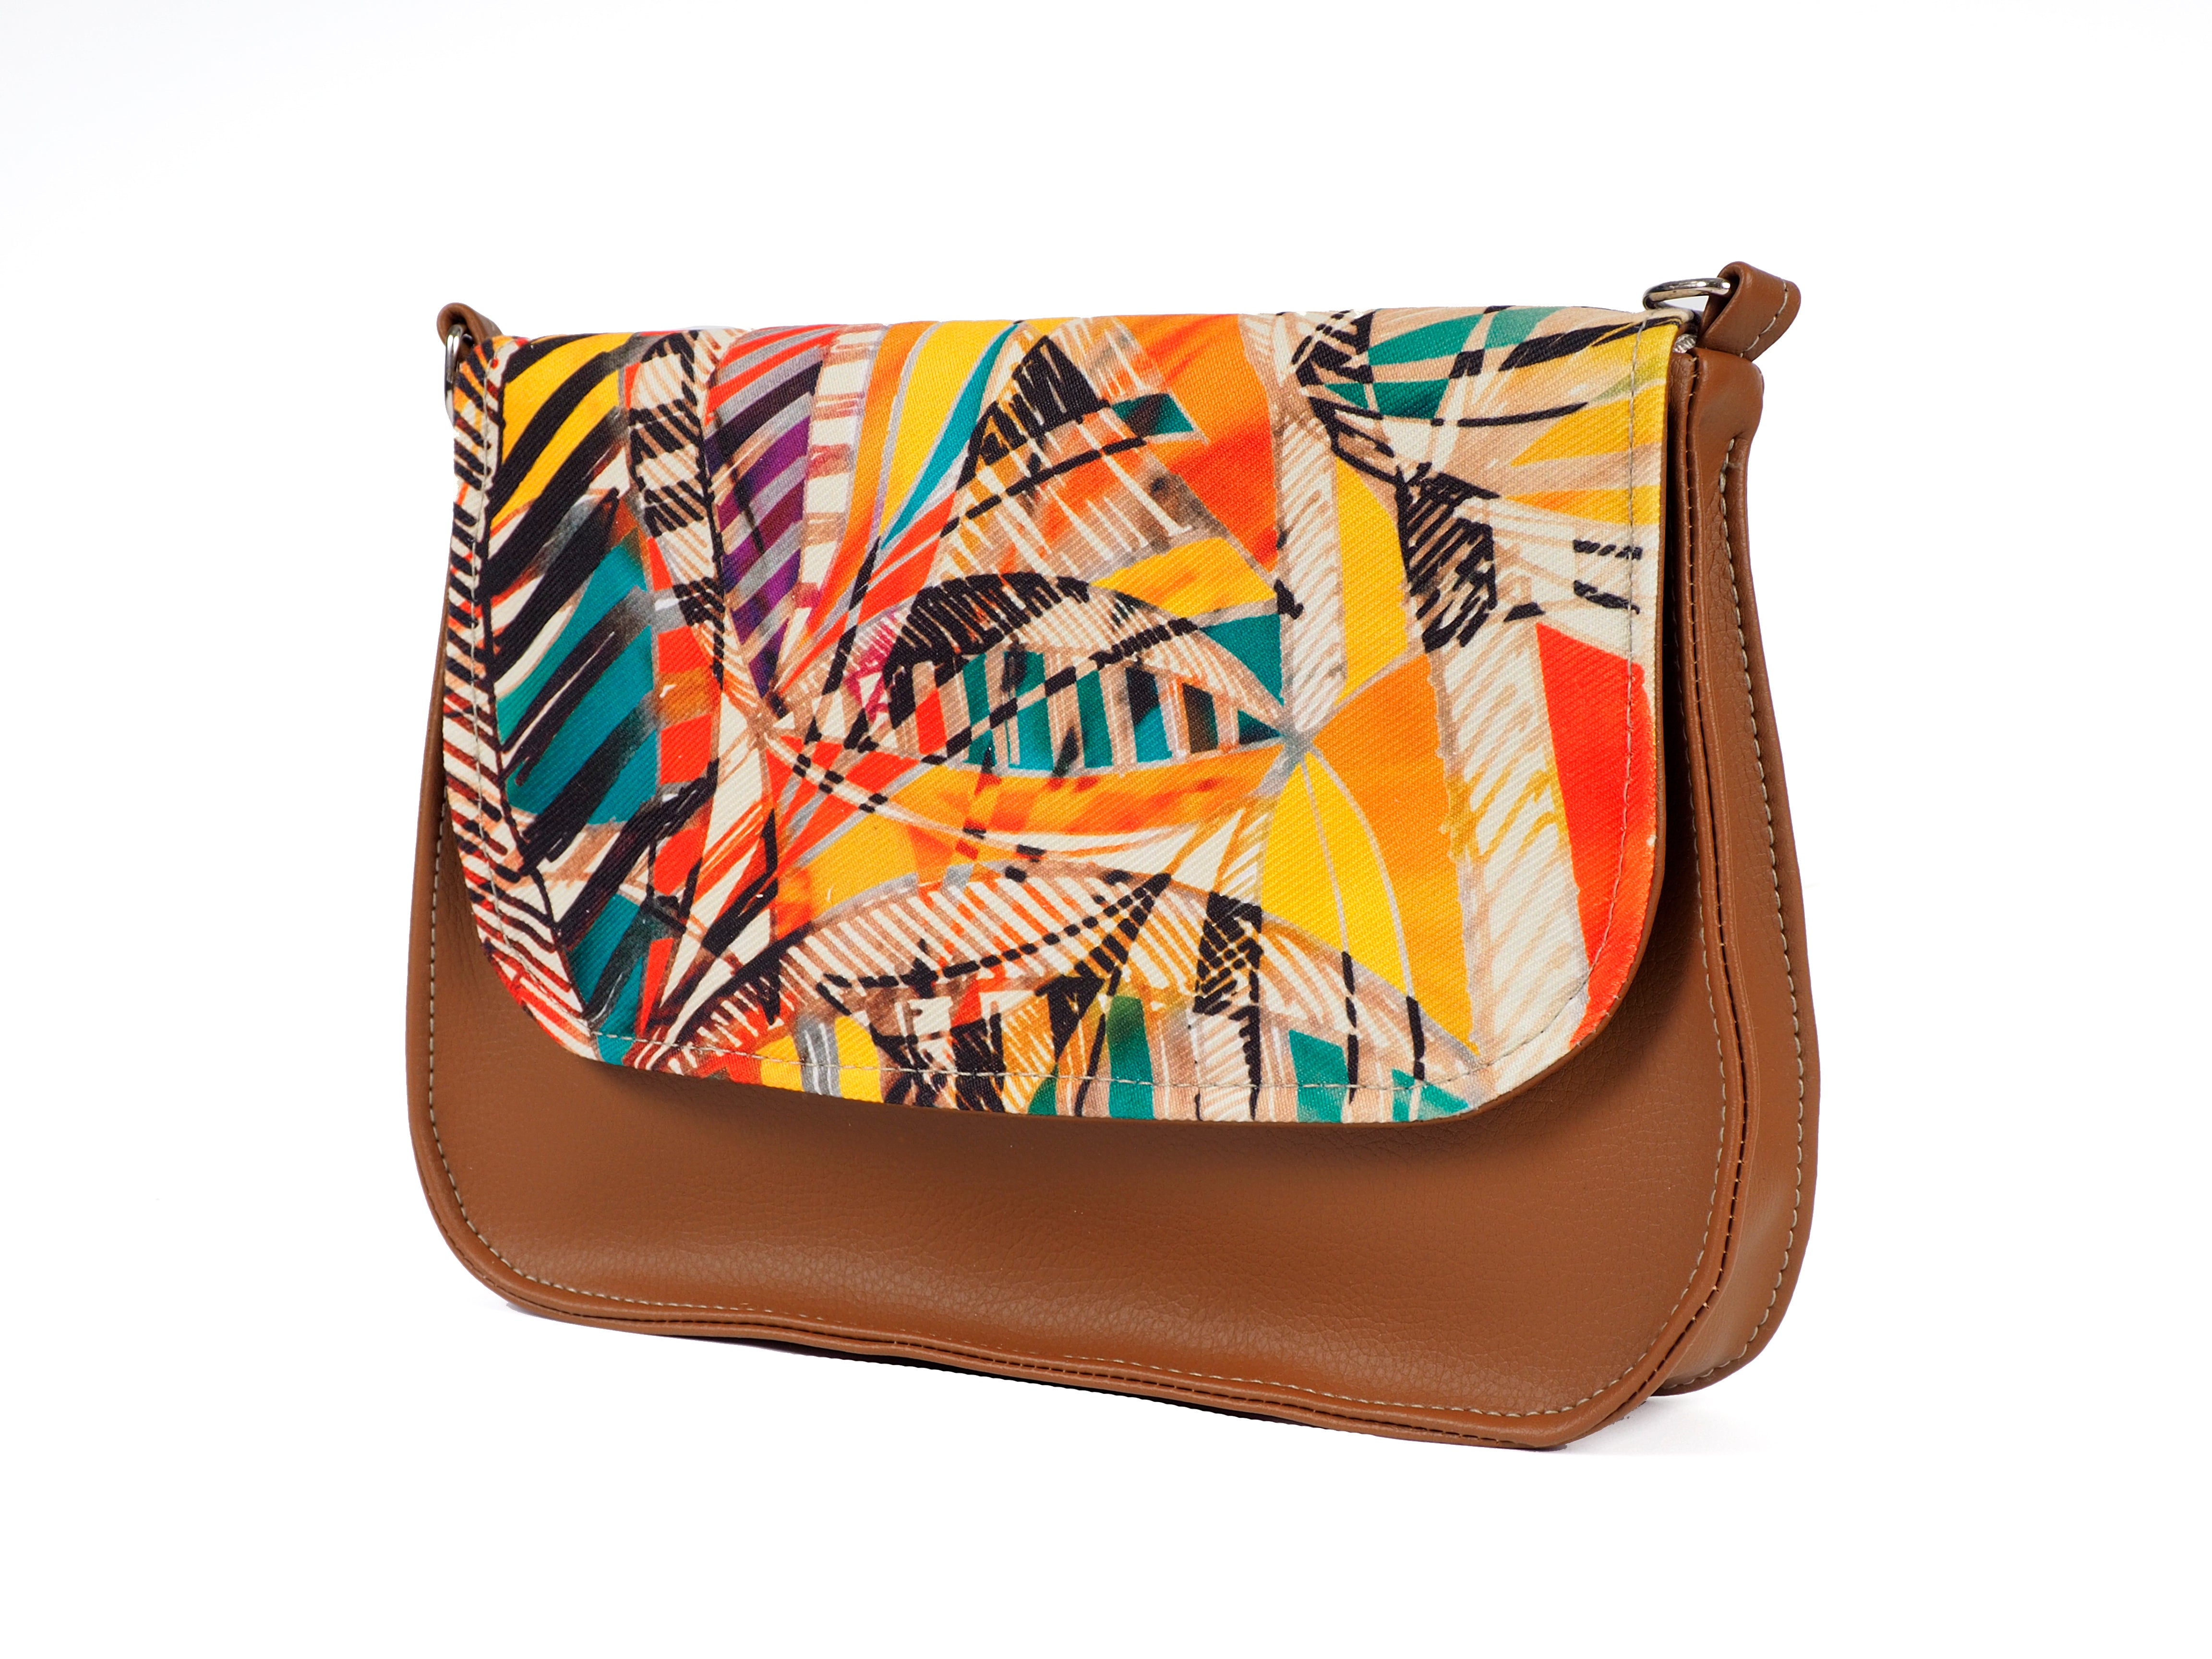 Bardo box bag - Leafpad - Premium bardo box bag from Leafpad - Just lvfloral, flowers, gift, handemade, leaves, nature, orange, vegan leather, woman, yellow52.00! Shop now at BARDO ART WORKS